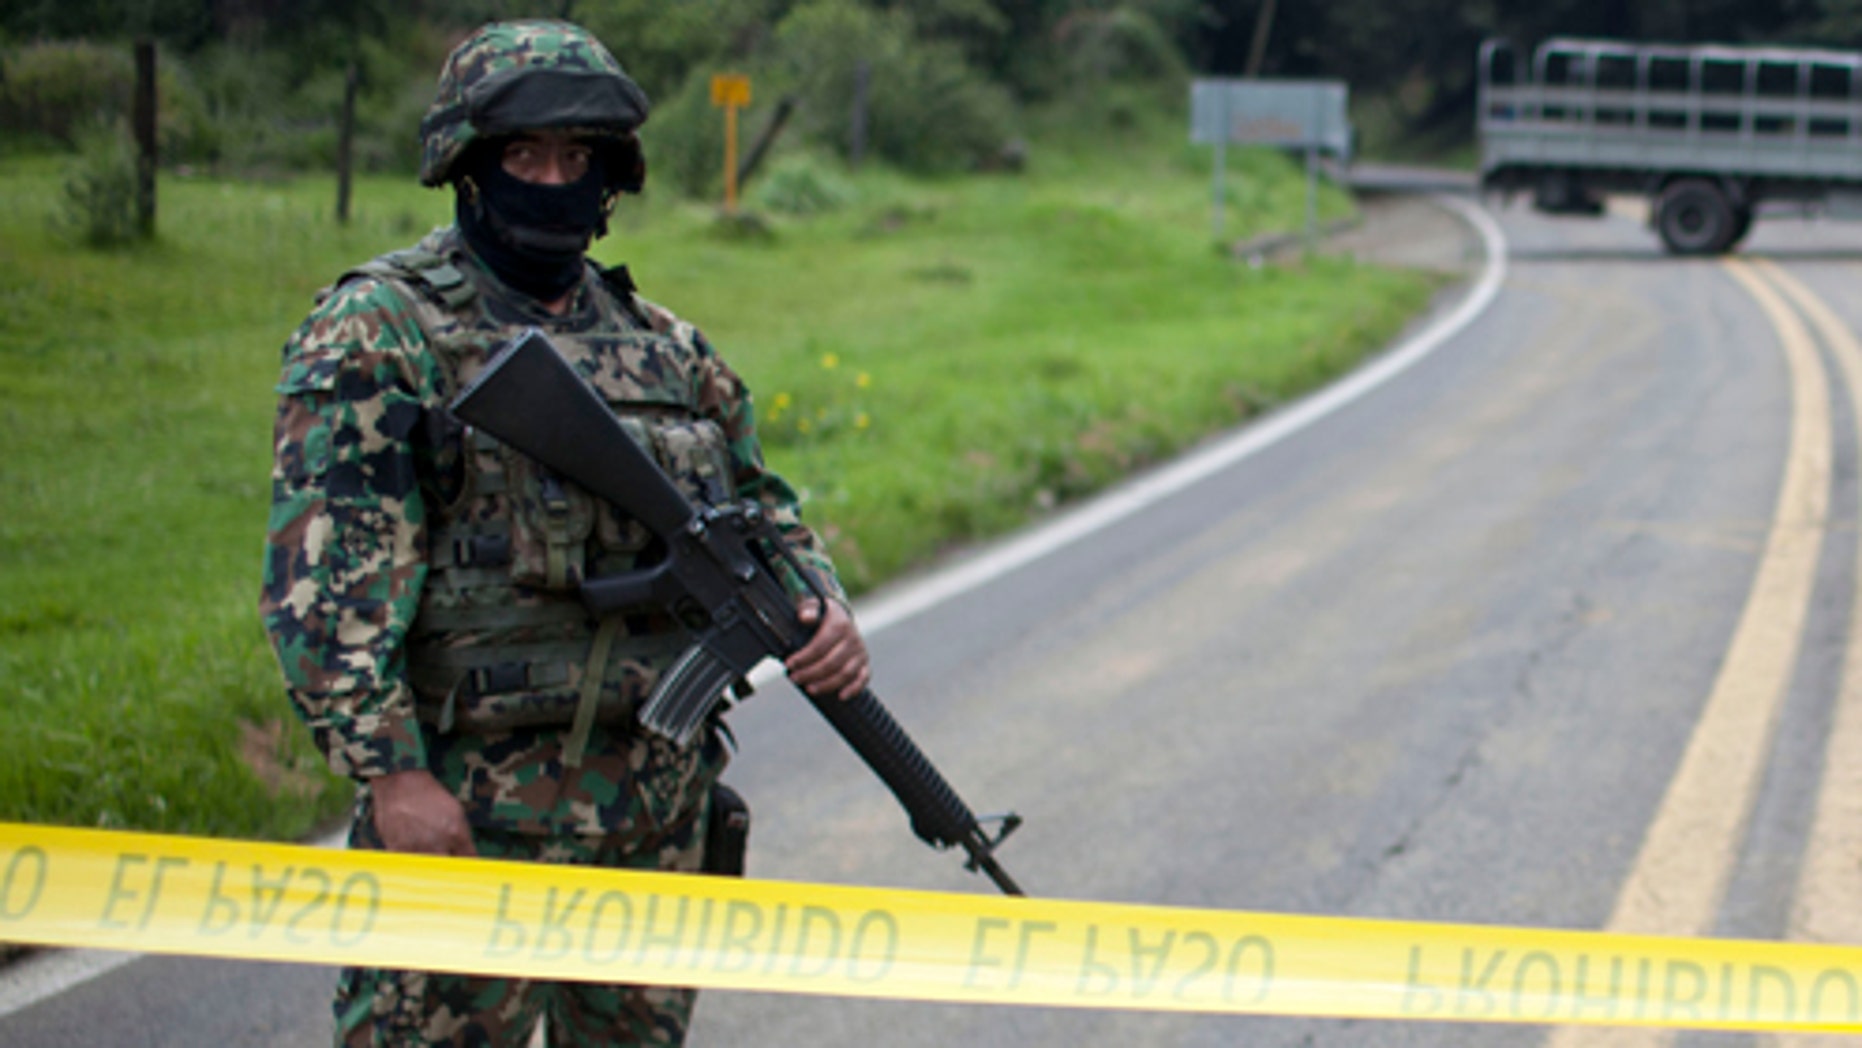 Mexican Authorities Investigate Police Shooting of US Embassy Vehicle